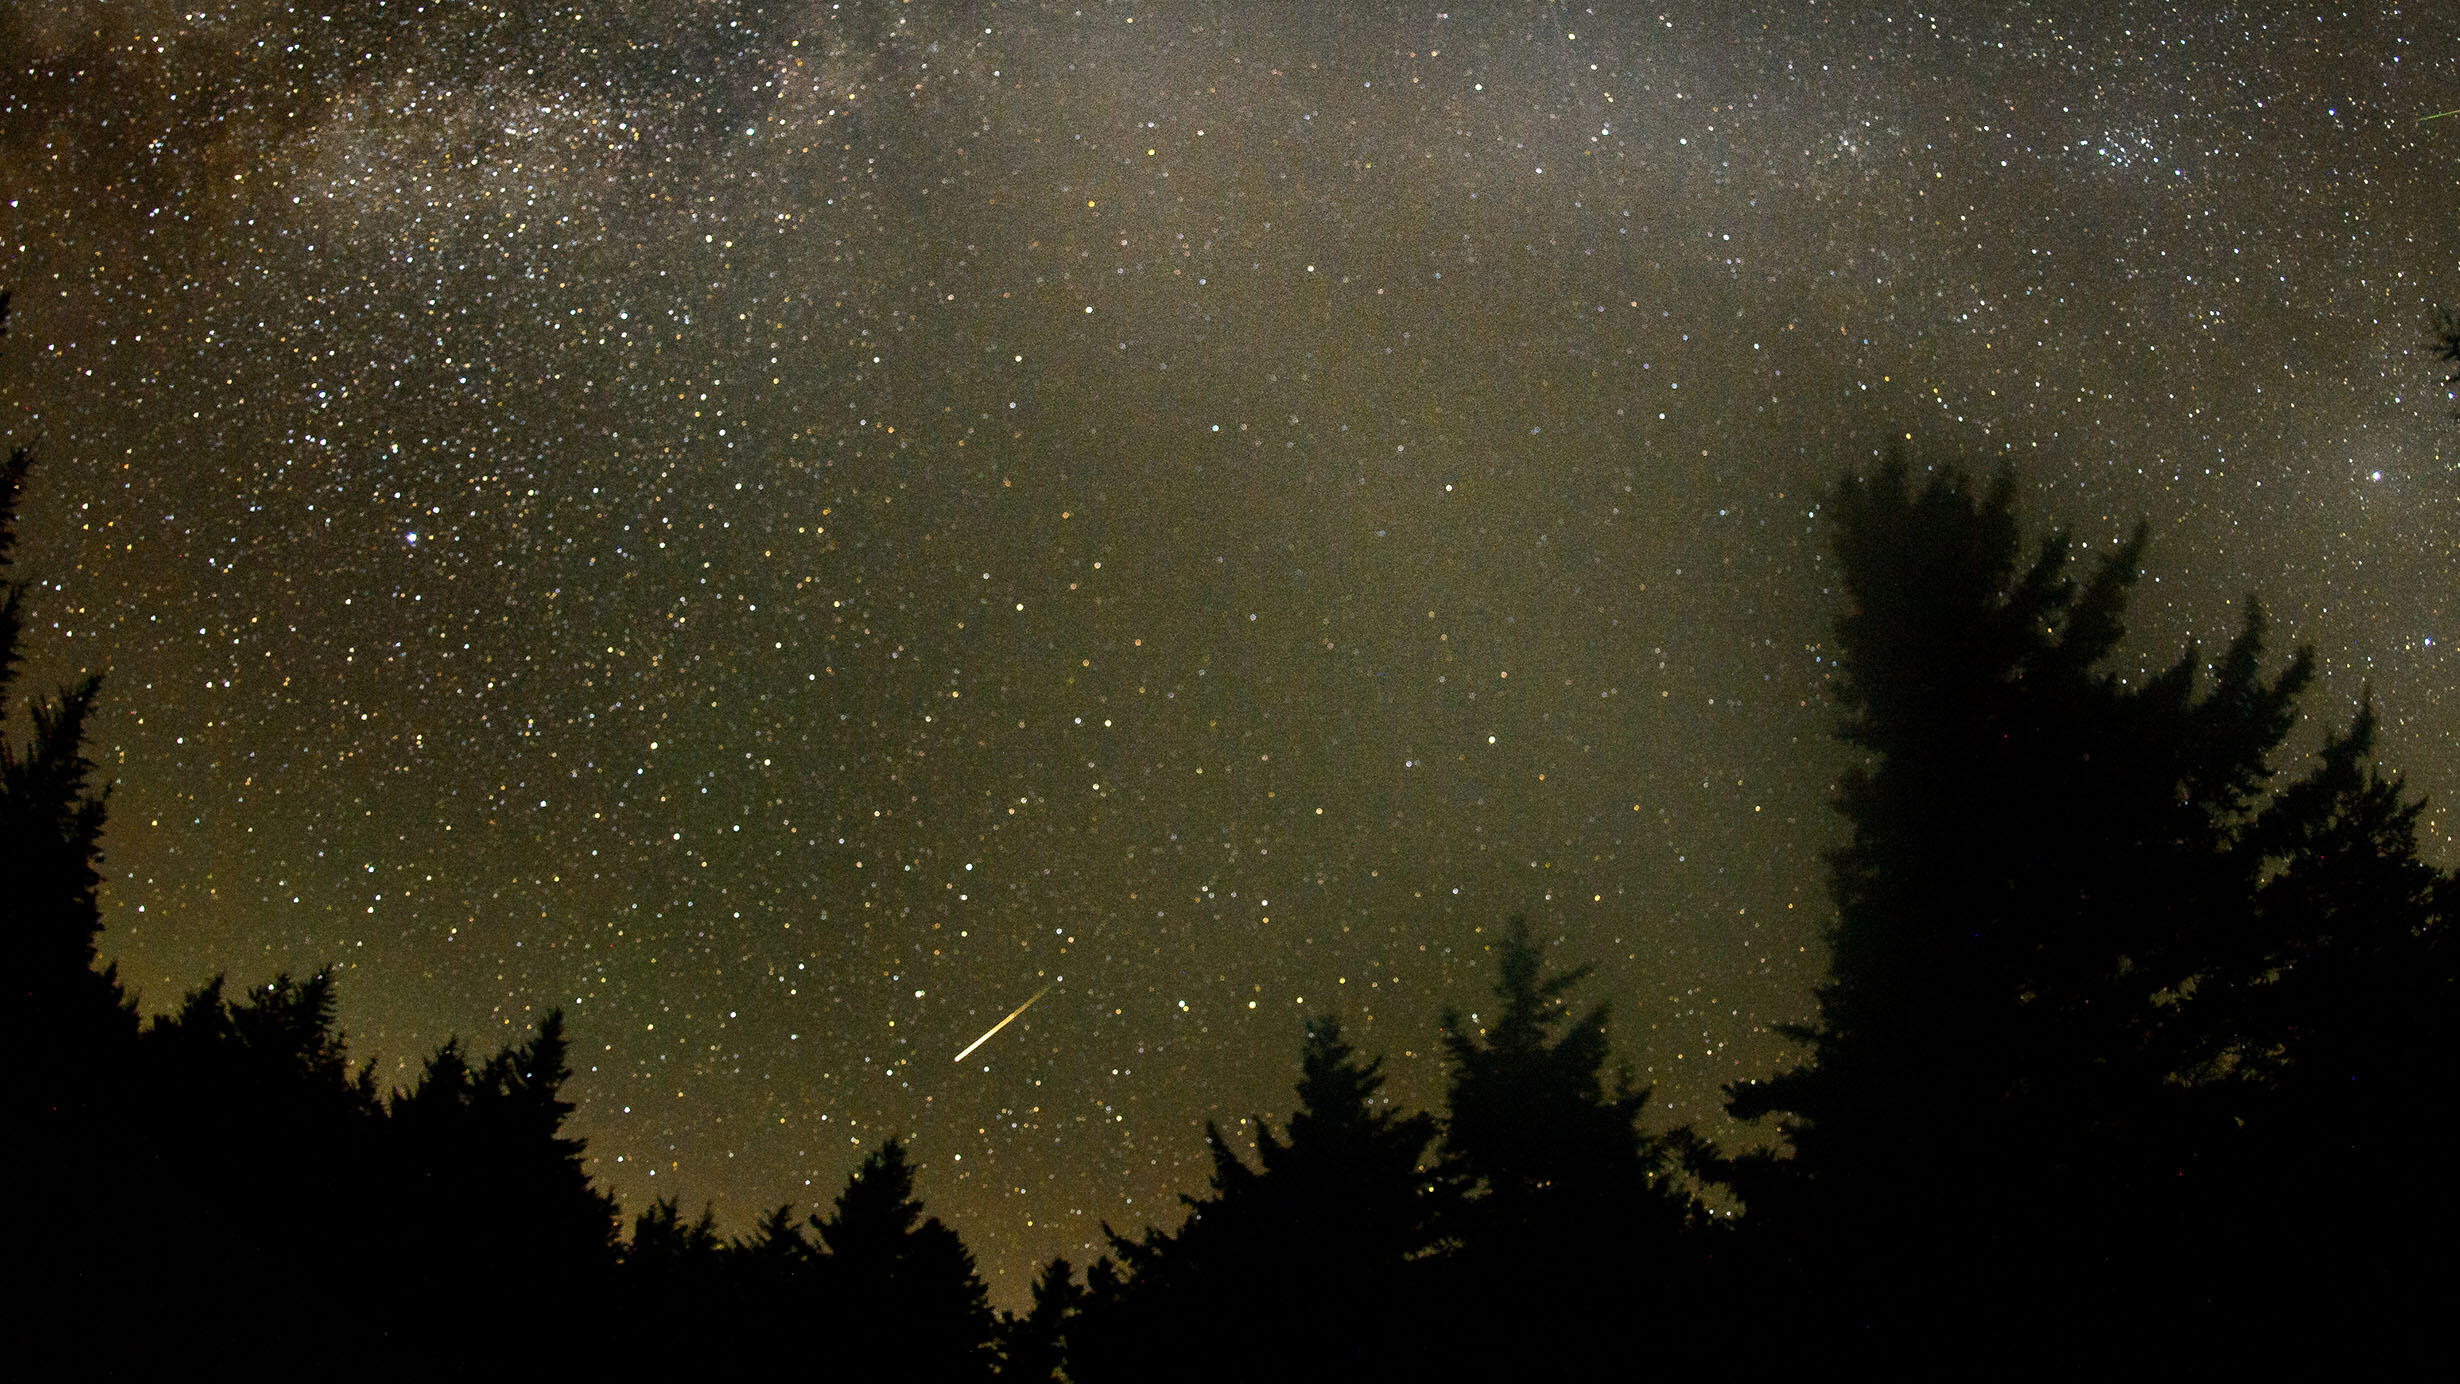 Meteor is visible as a small streak of light in the night sky.